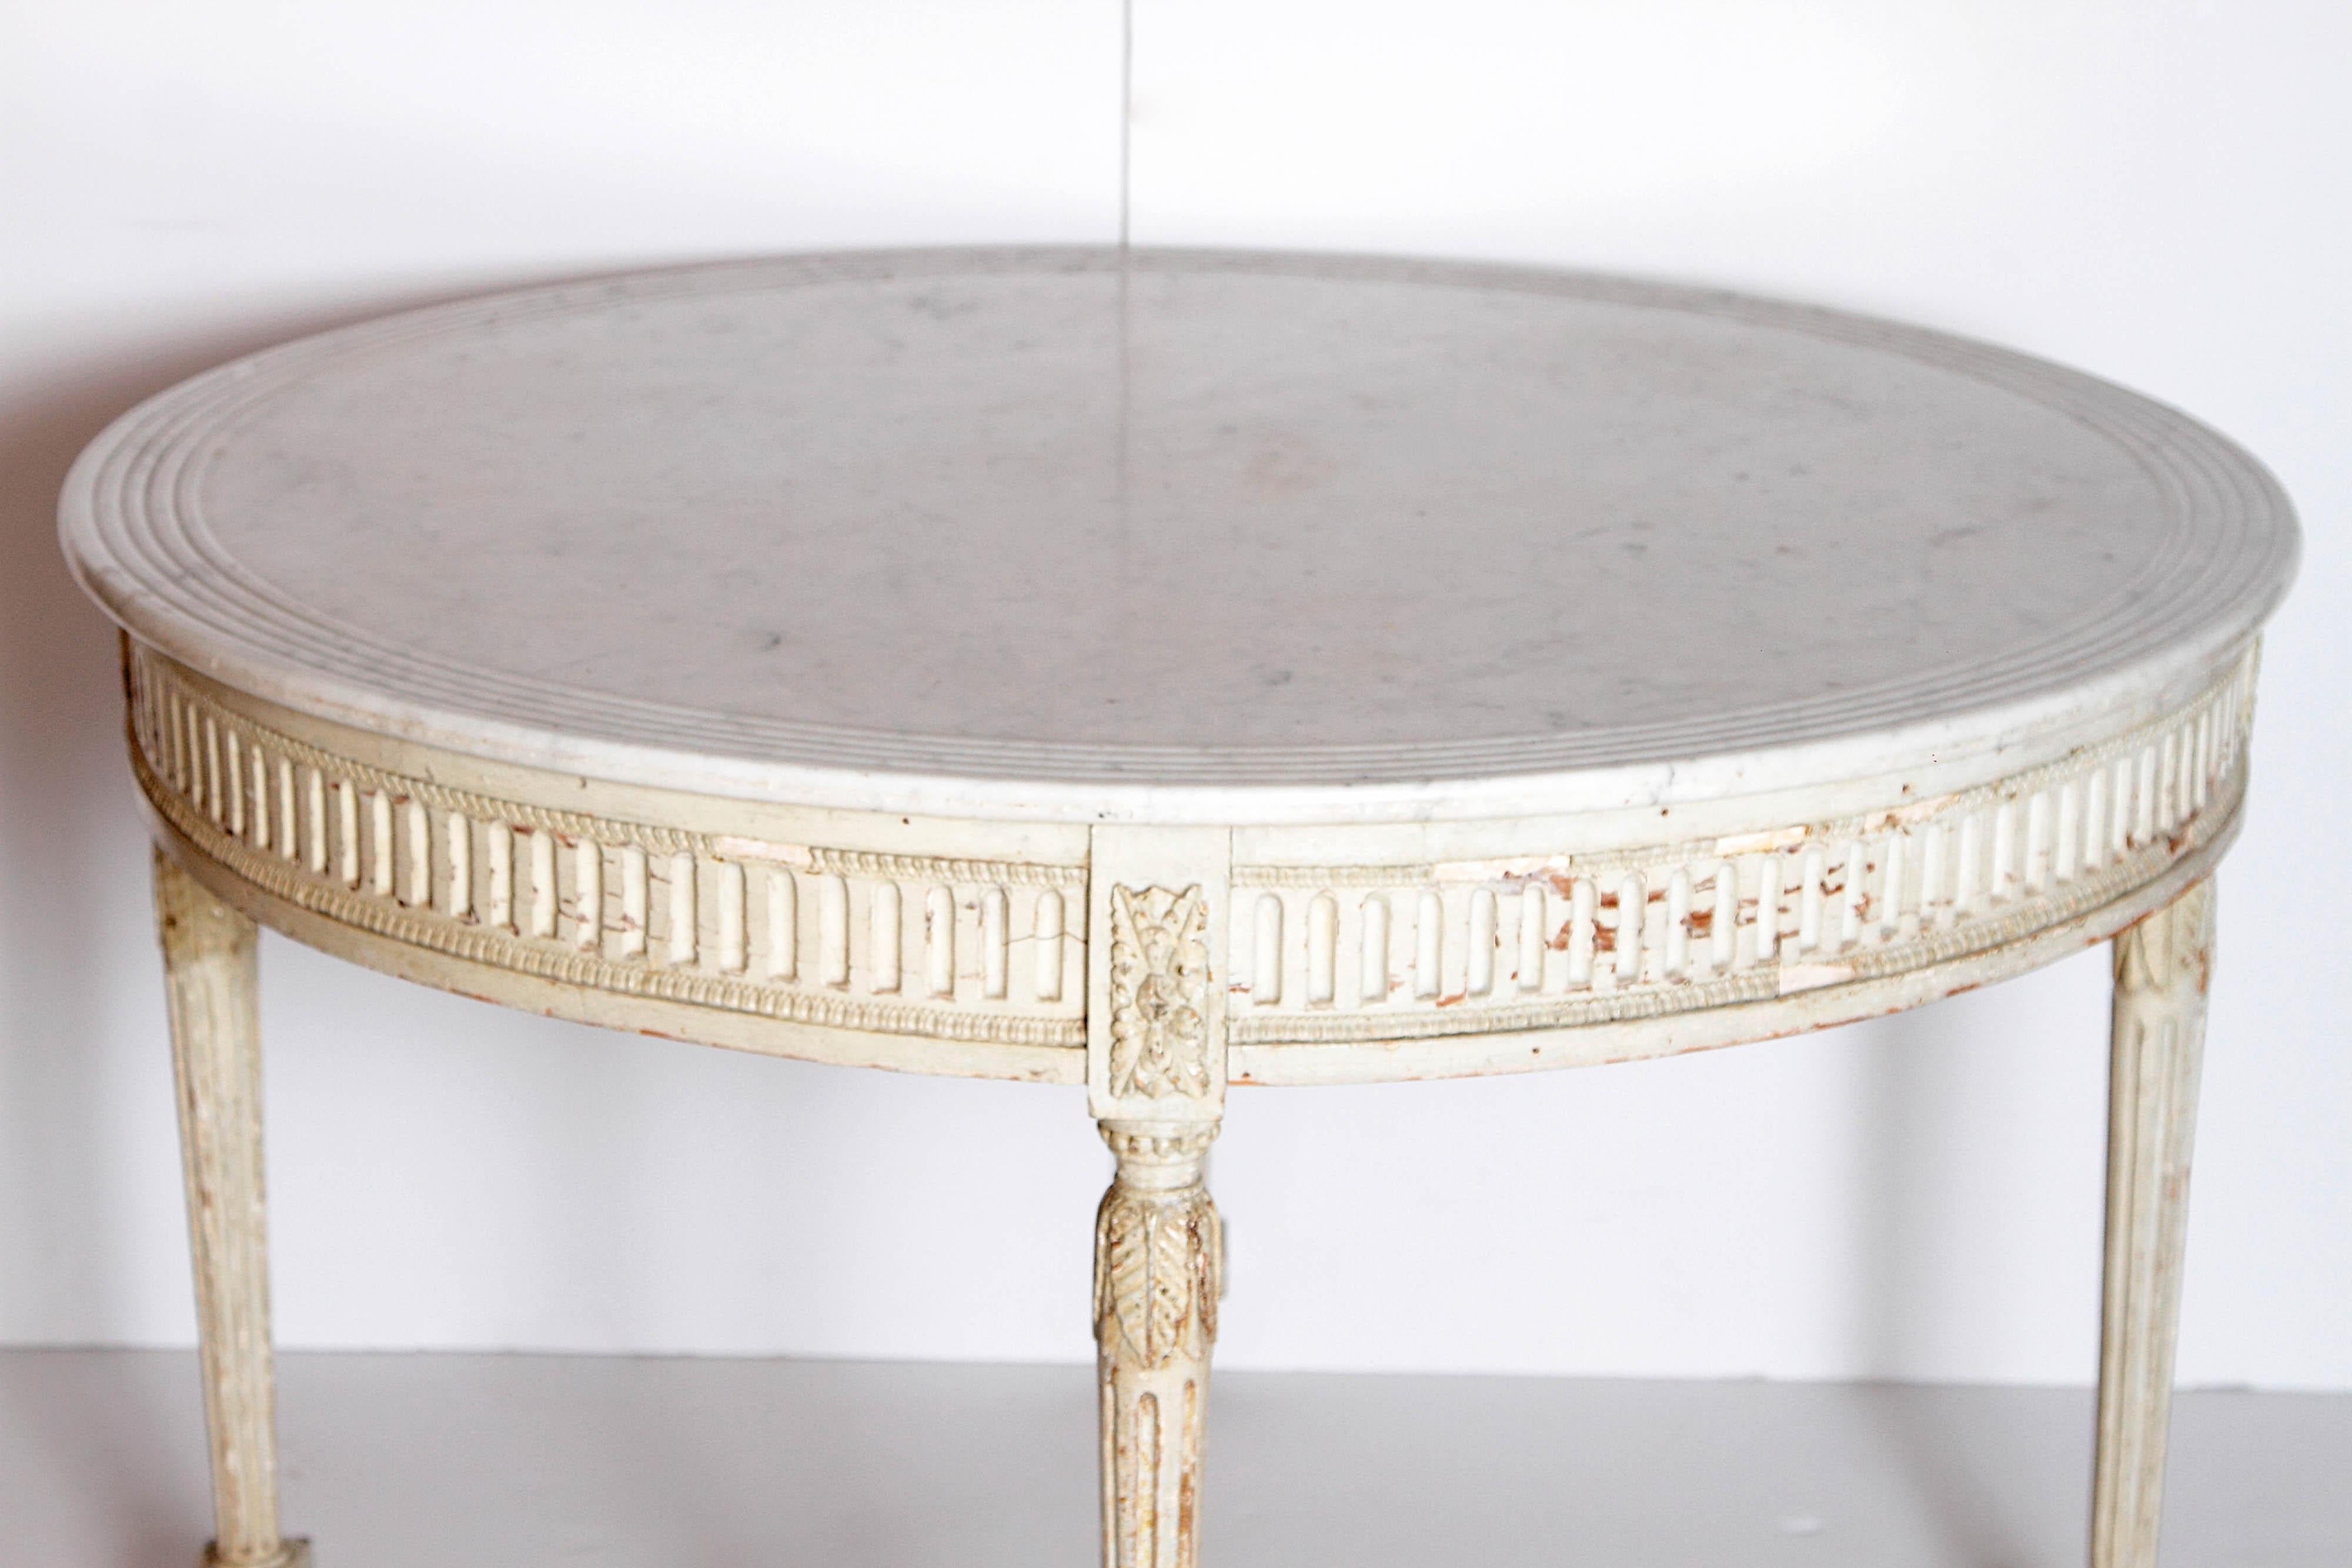 Neoclassical Round Painted Table with Marble Top 1